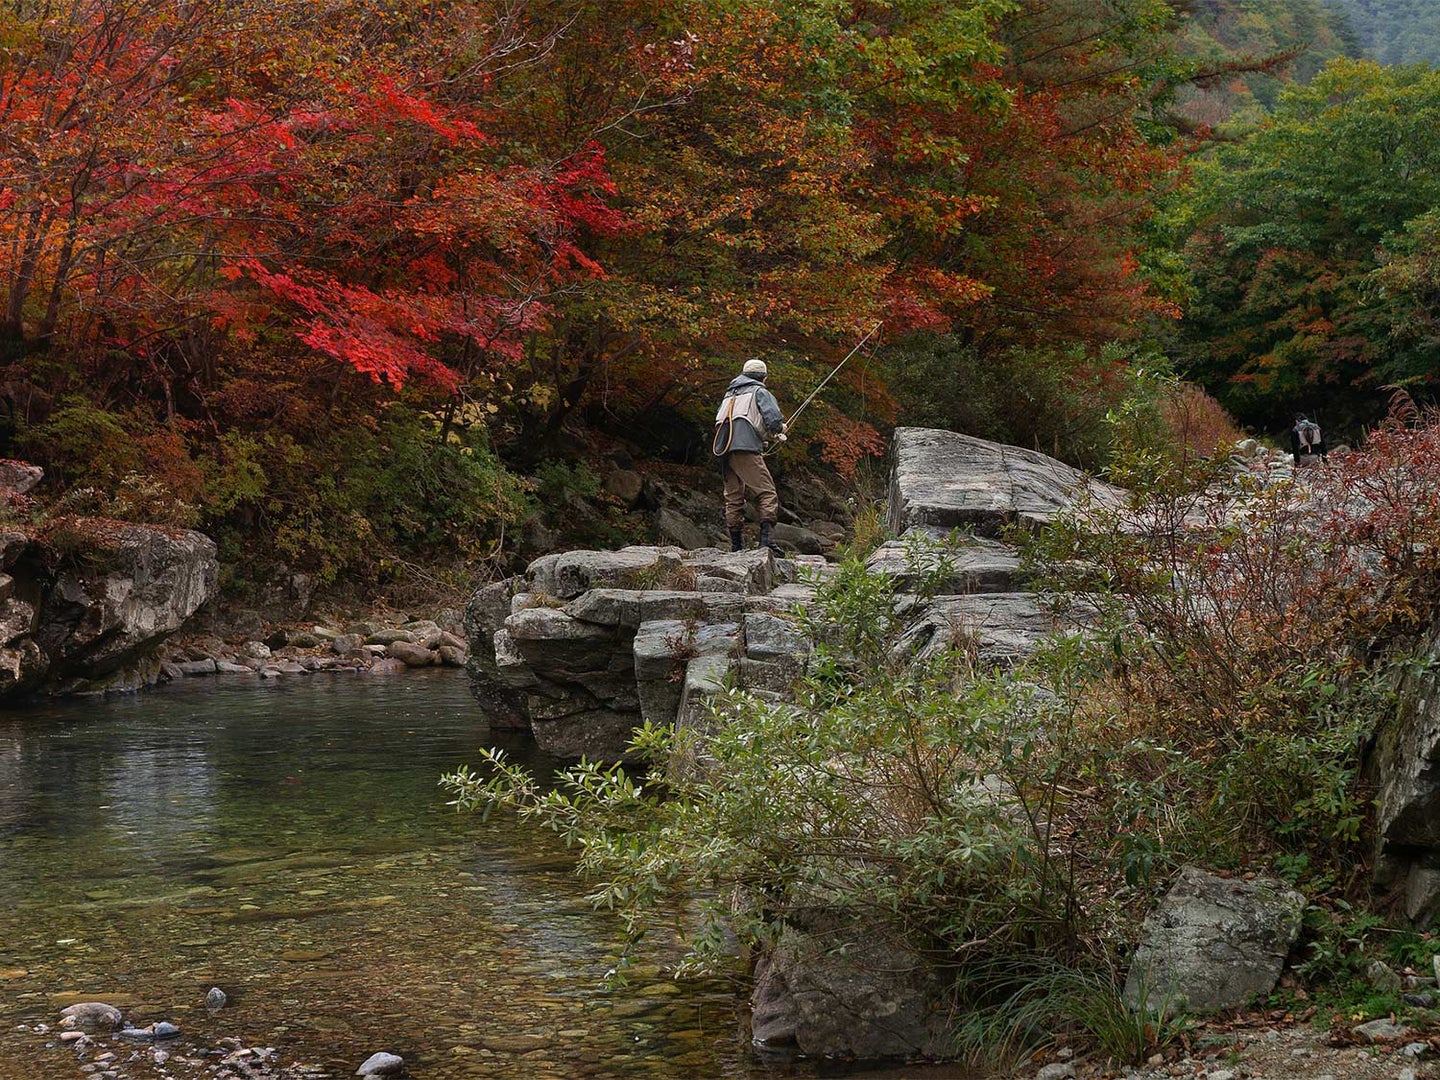 An angler stands on a rocky outcrop over a stream.